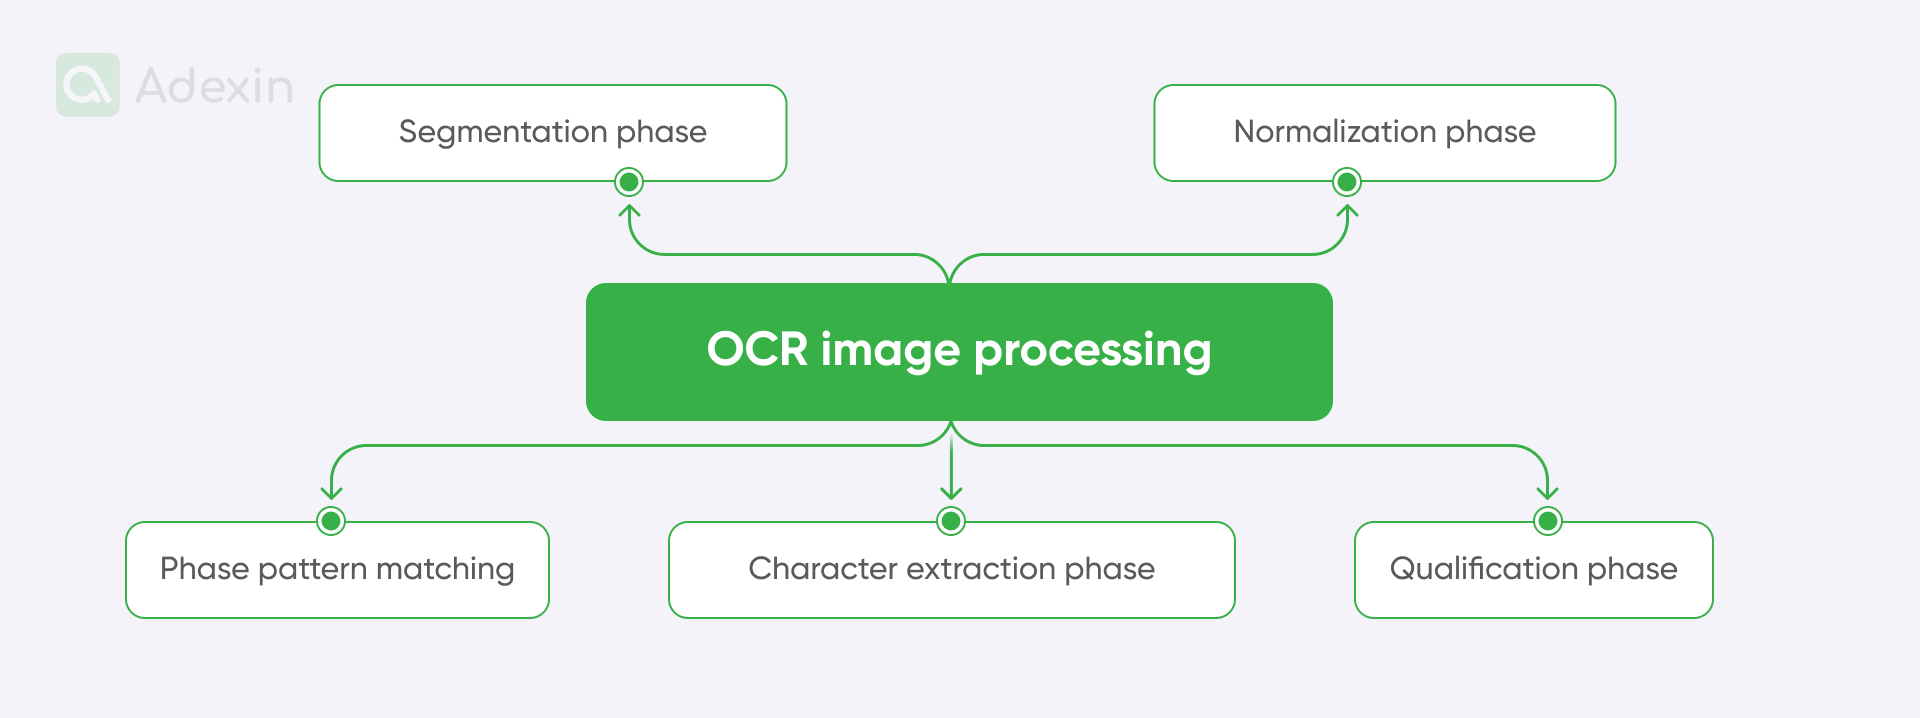 Elements of OCR image processing